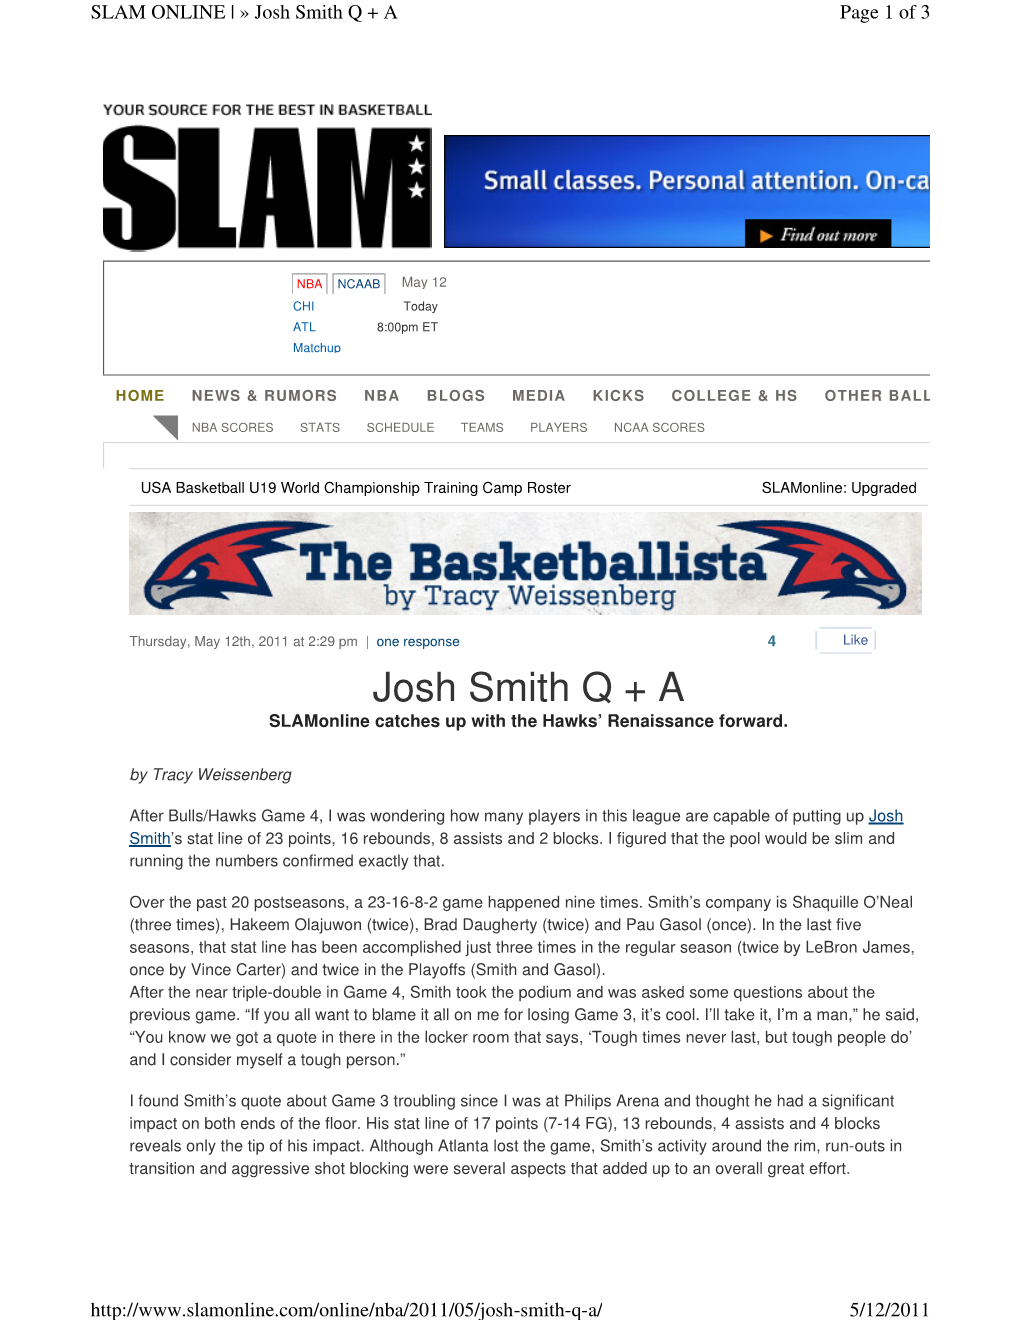 Josh Smith Q + a Page 1 of 3